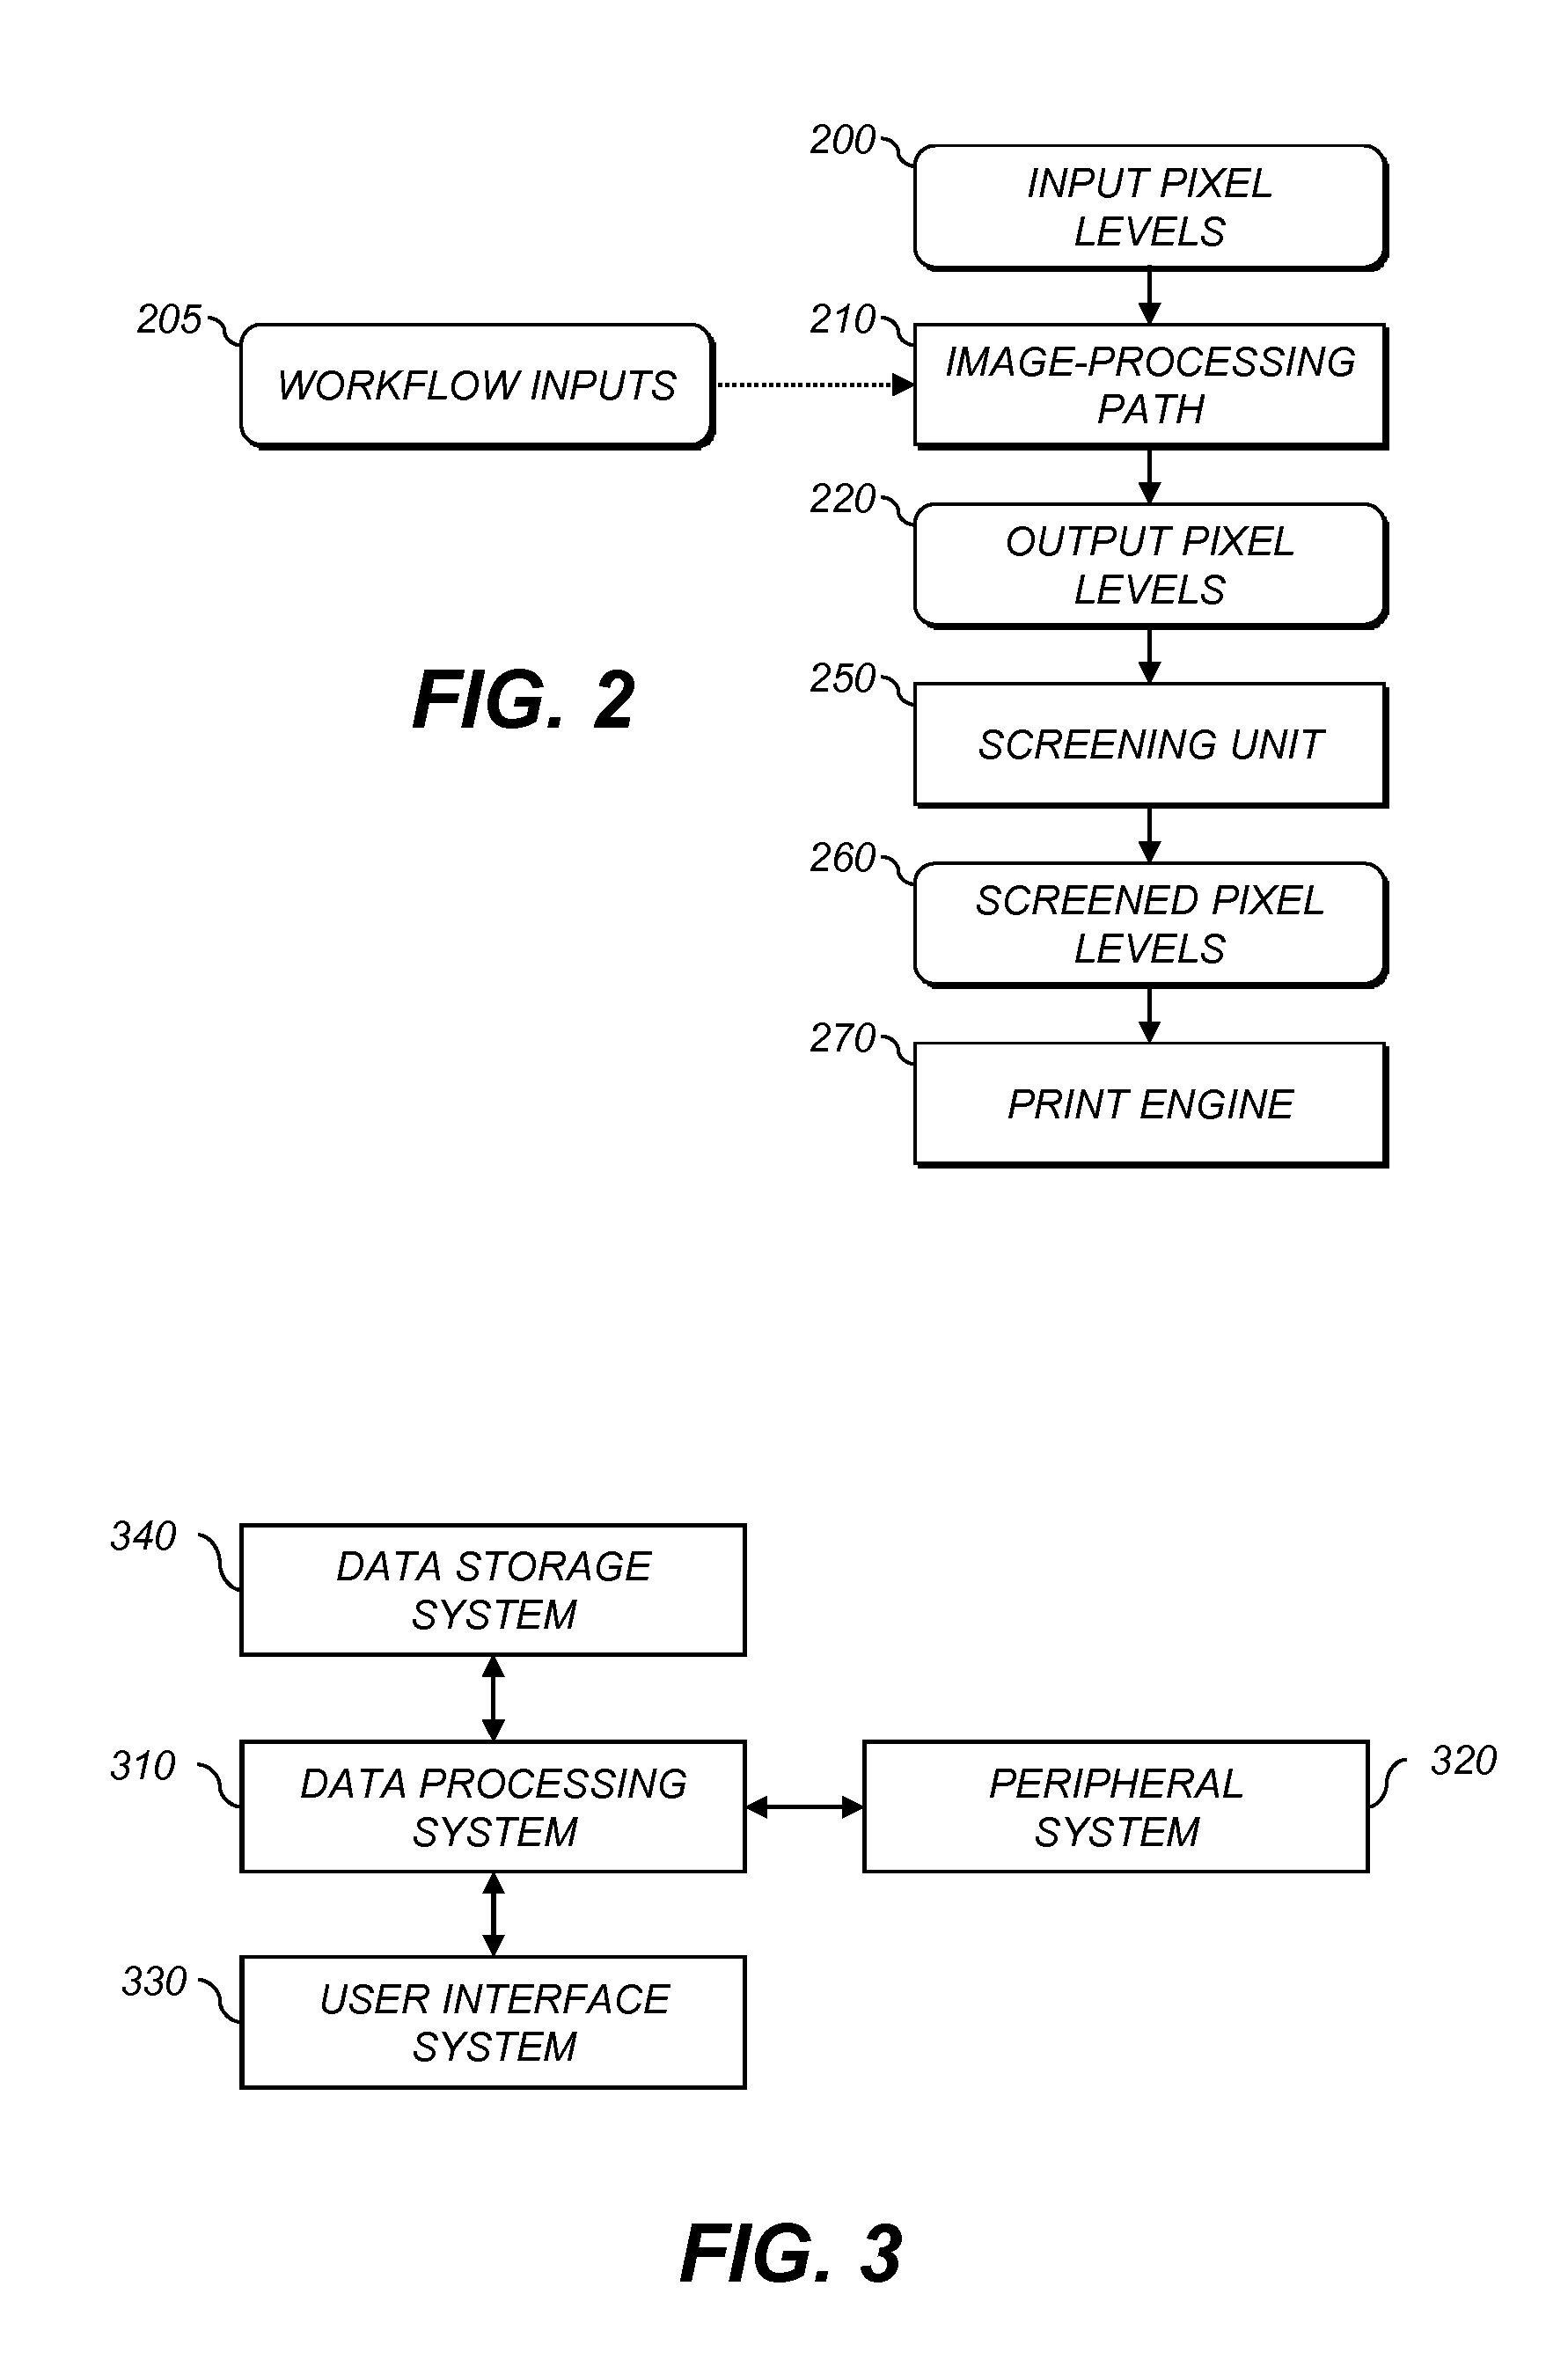 Depositing job-specified texture on receiver